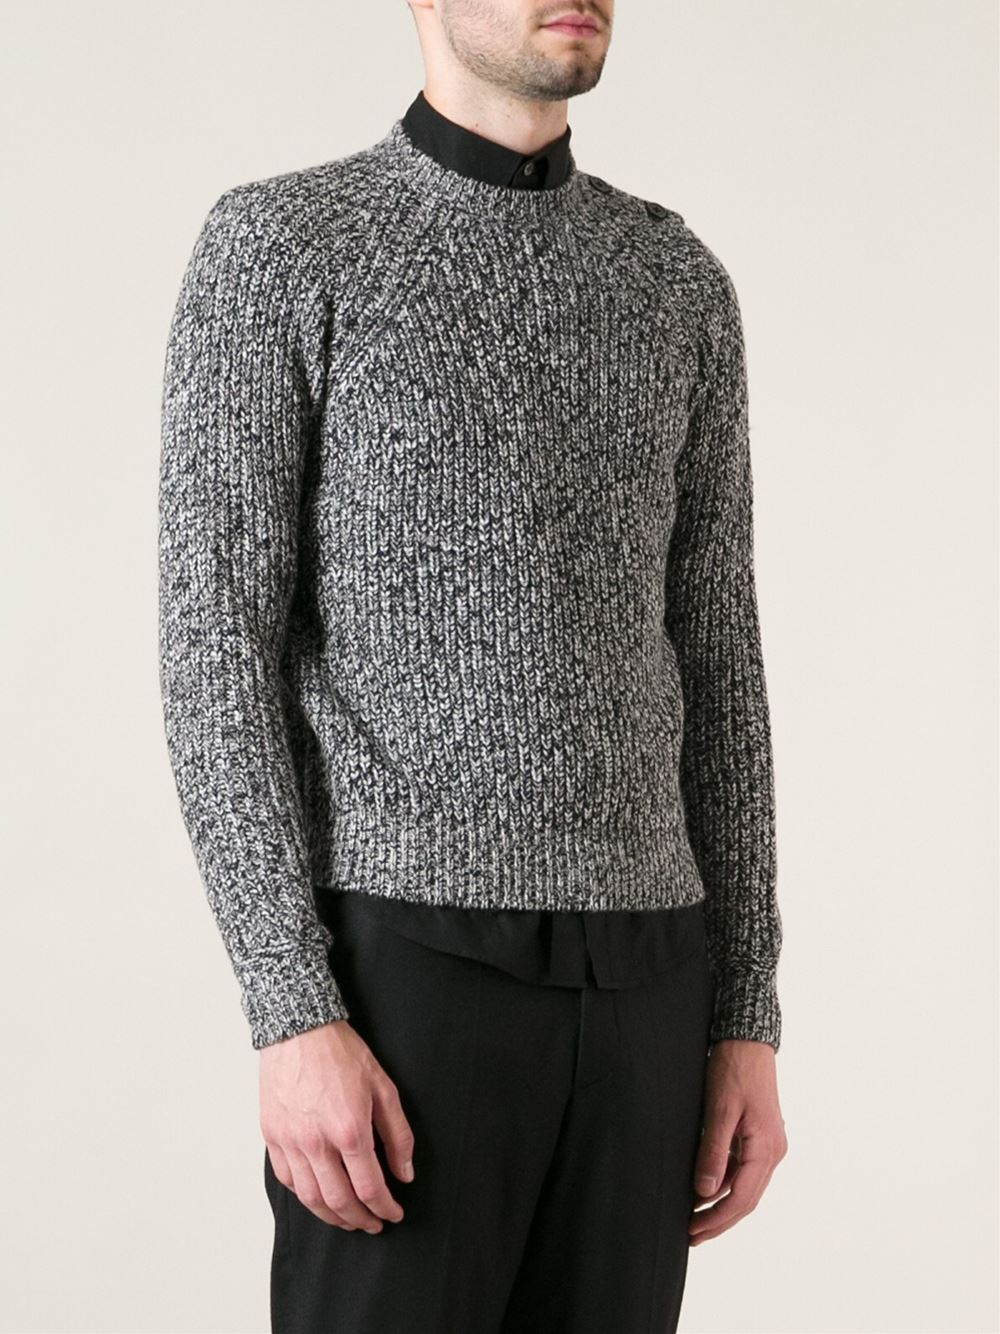 Lyst - Carven Thick Knit Sweater in Black for Men